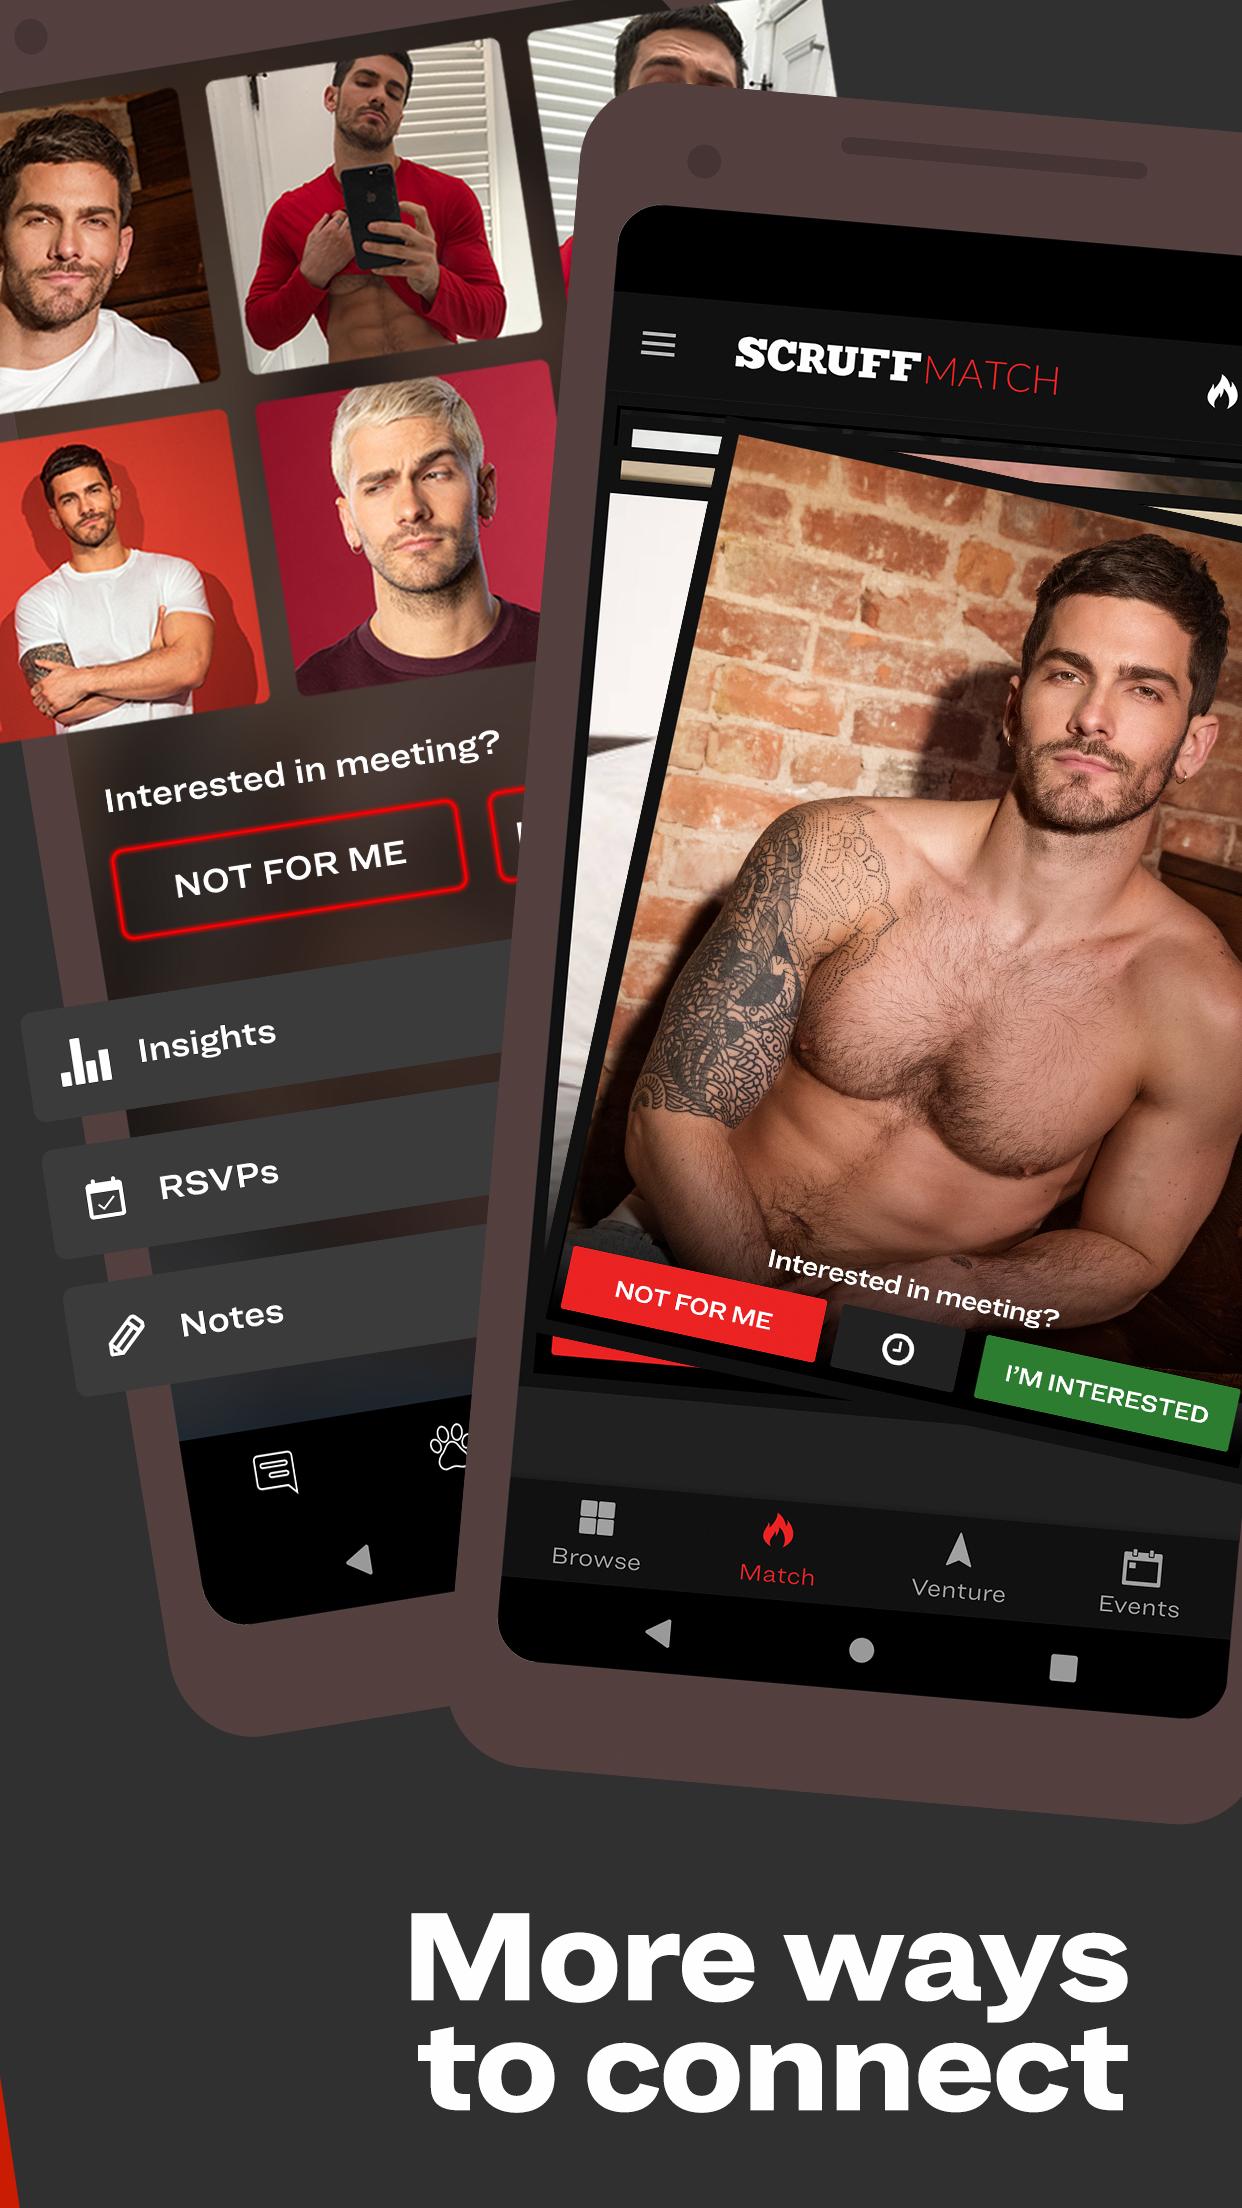 Scruff gay dating app updated with improved profile support